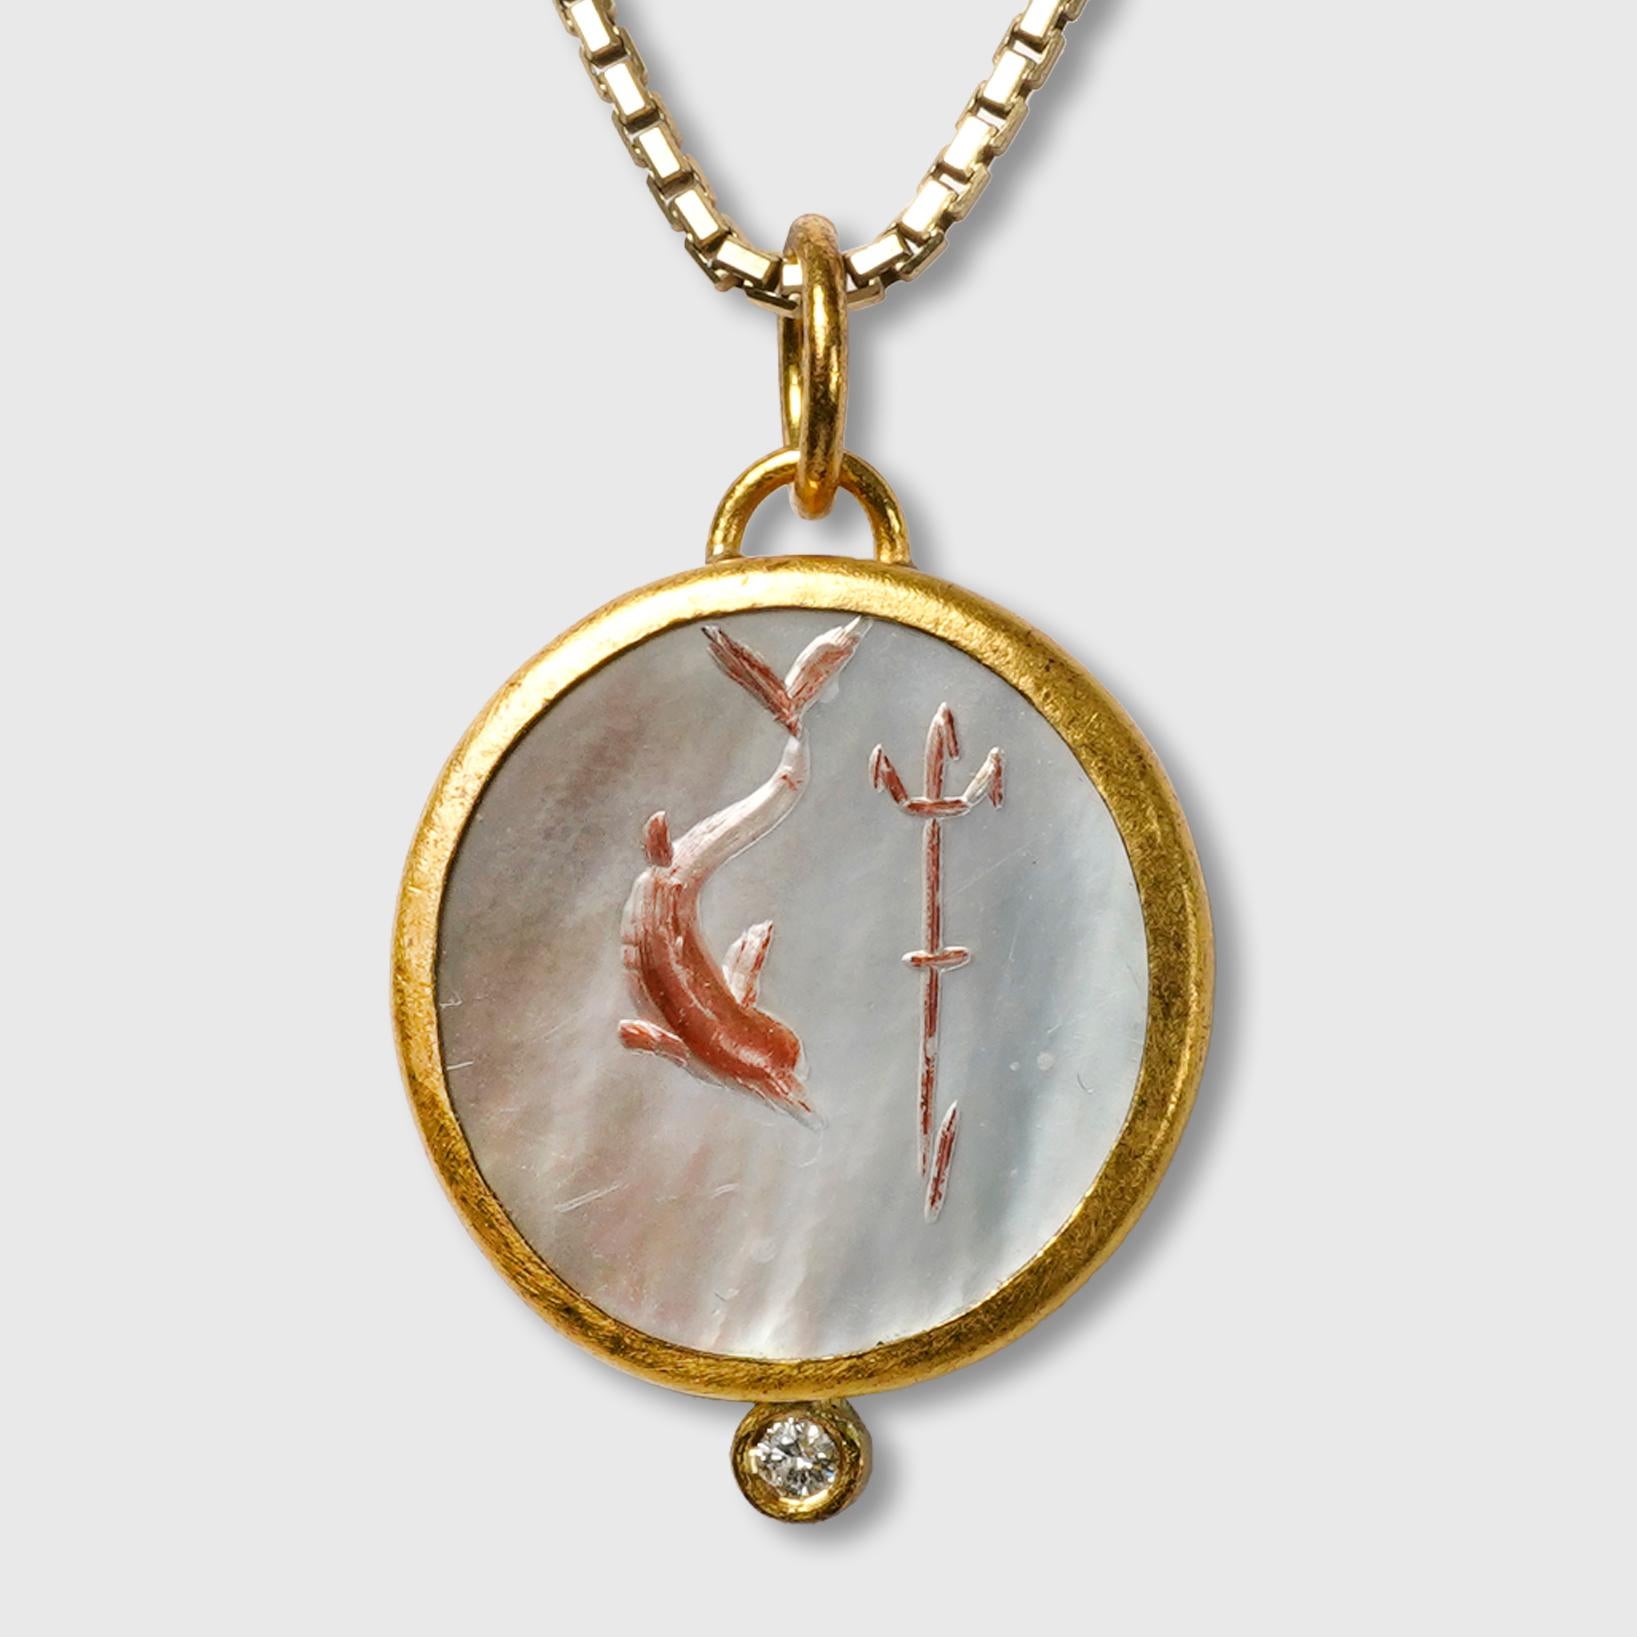 Poseidon, Arrow & Dolphin Intaglio Charm 24kt Gold, Carved 6.4ct Mother of Pearl For Sale 1